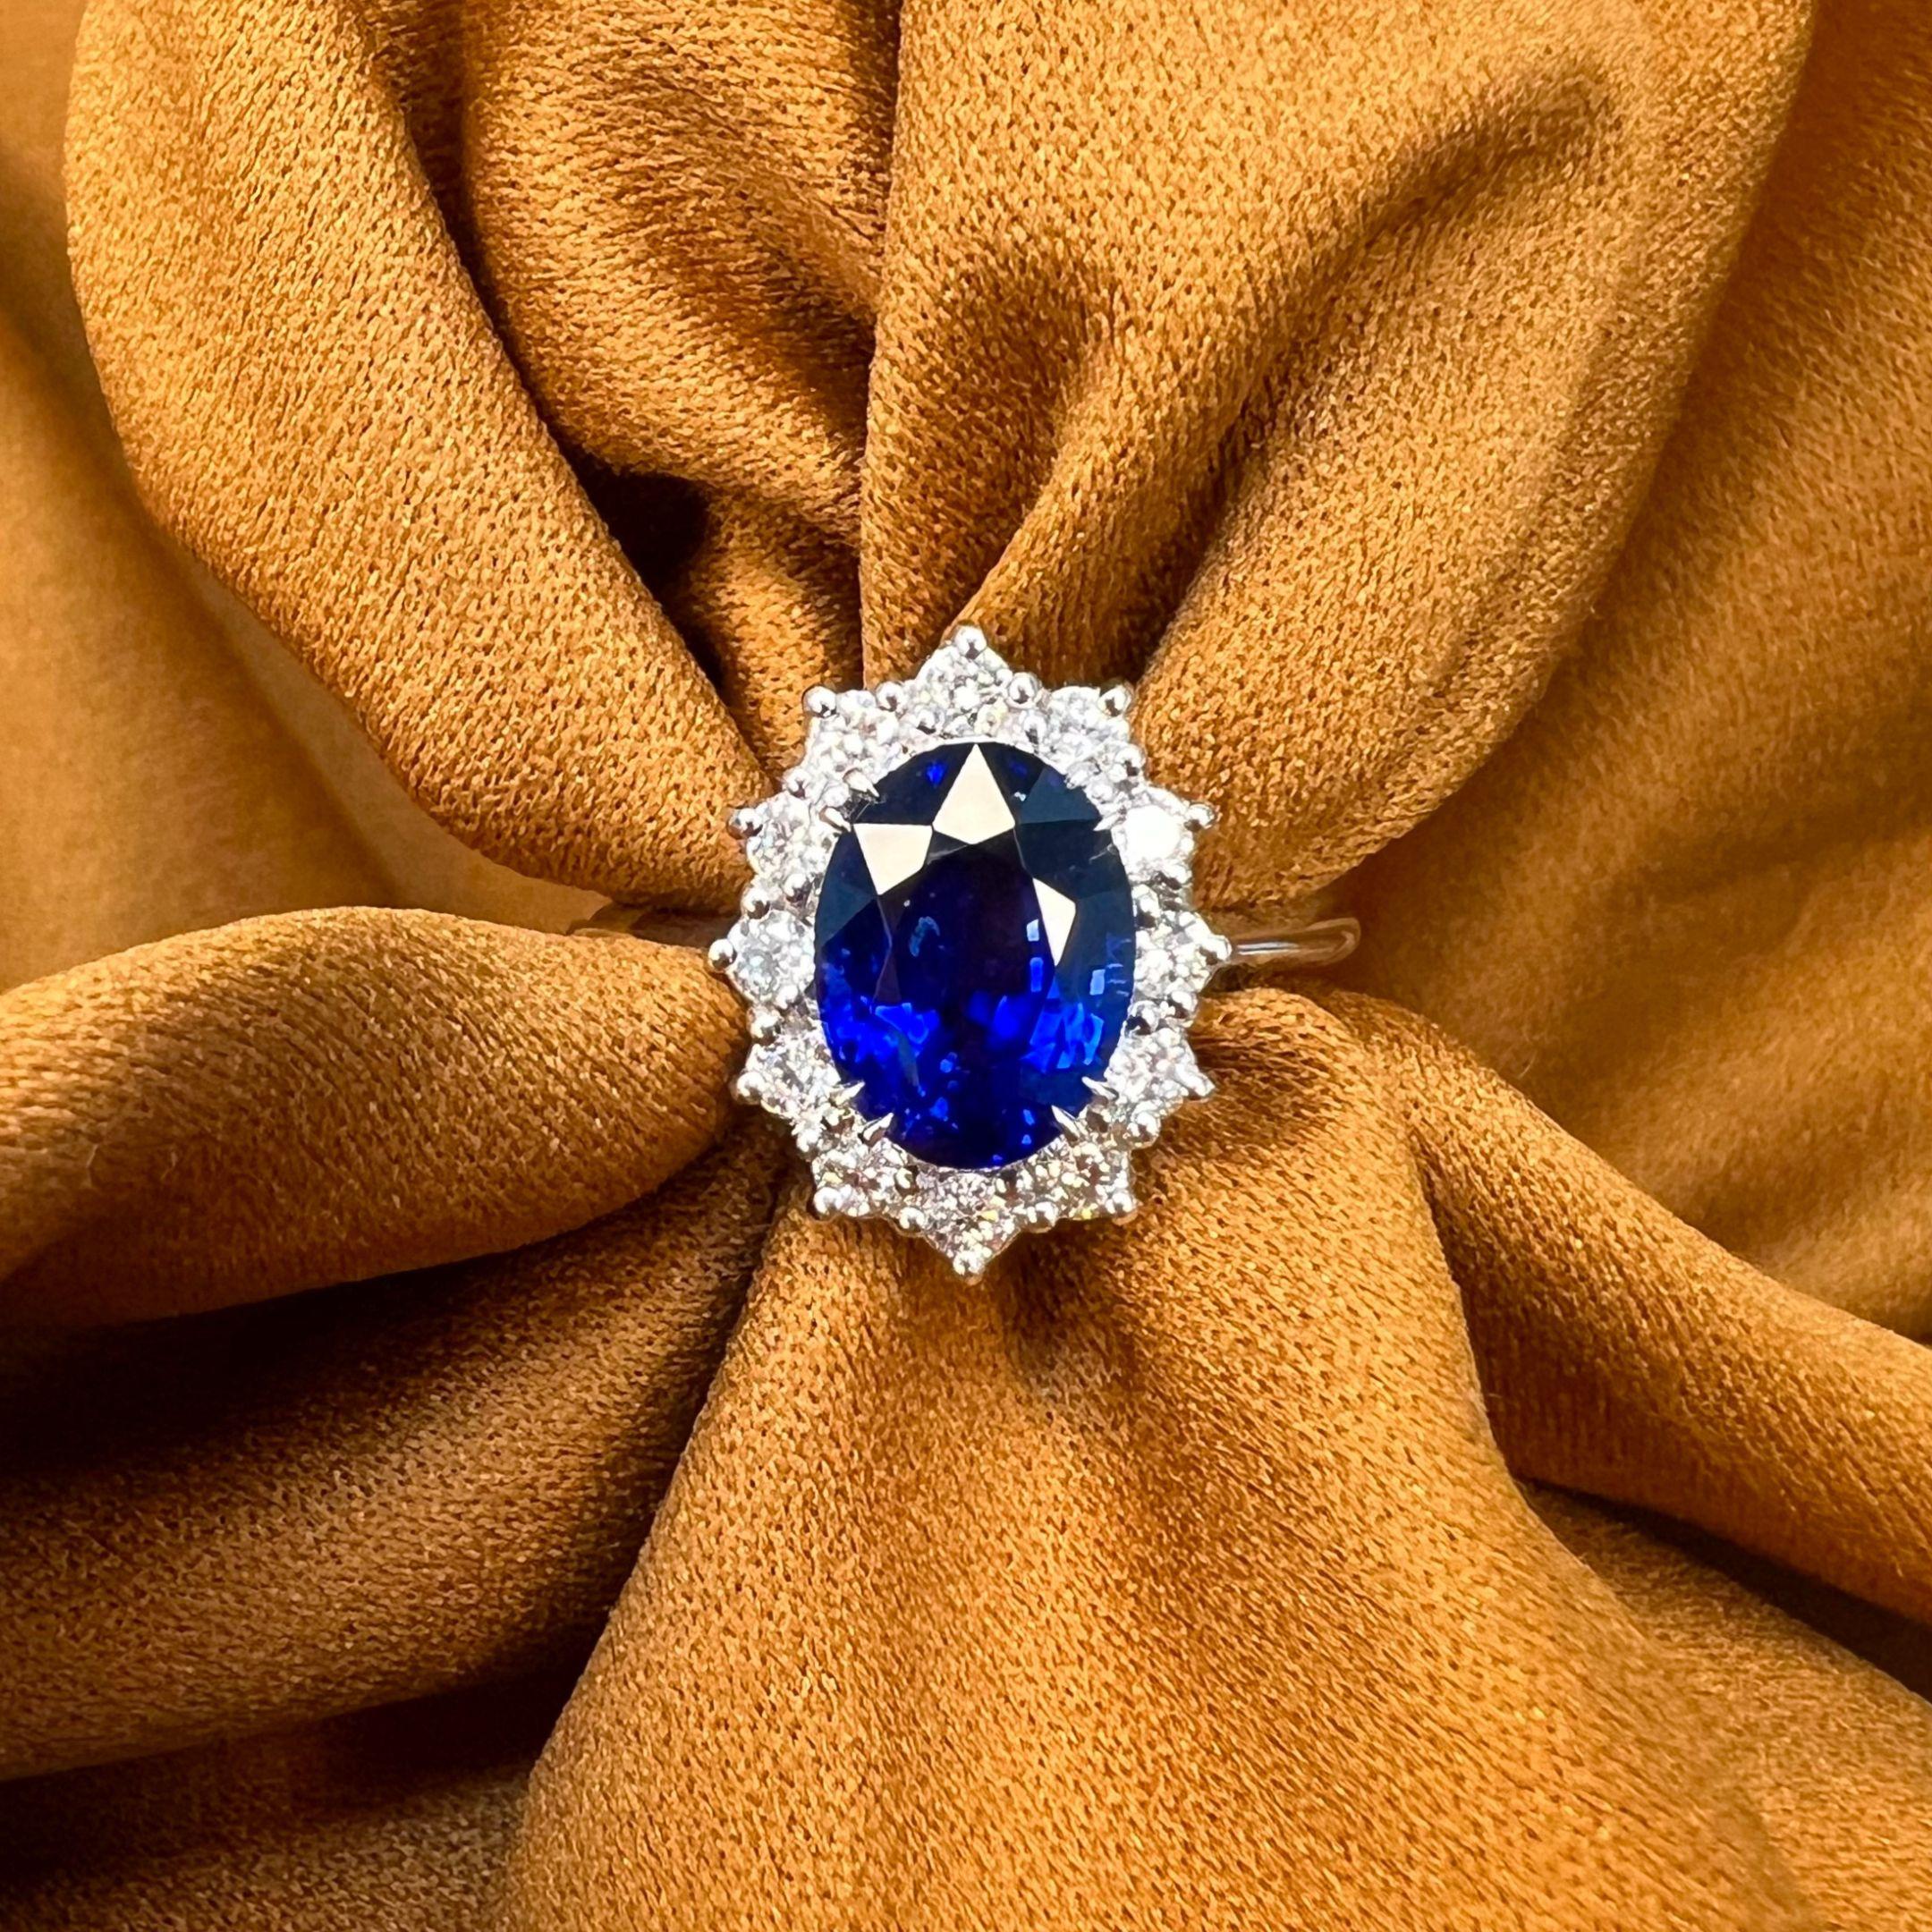 Sapphire Weight: 3.02 CTs
Measurements: 9x6 mm
Diamond Weight: 0.36 CTs (2mm)
Metal: 18K White Gold 
Gold Weight: 4.55 gm
Ring Size: 7
Shape: Oval
Color: Royal Blue
Hardness: 9
Birthstone: September
Product ID: MUR23937/Line 7